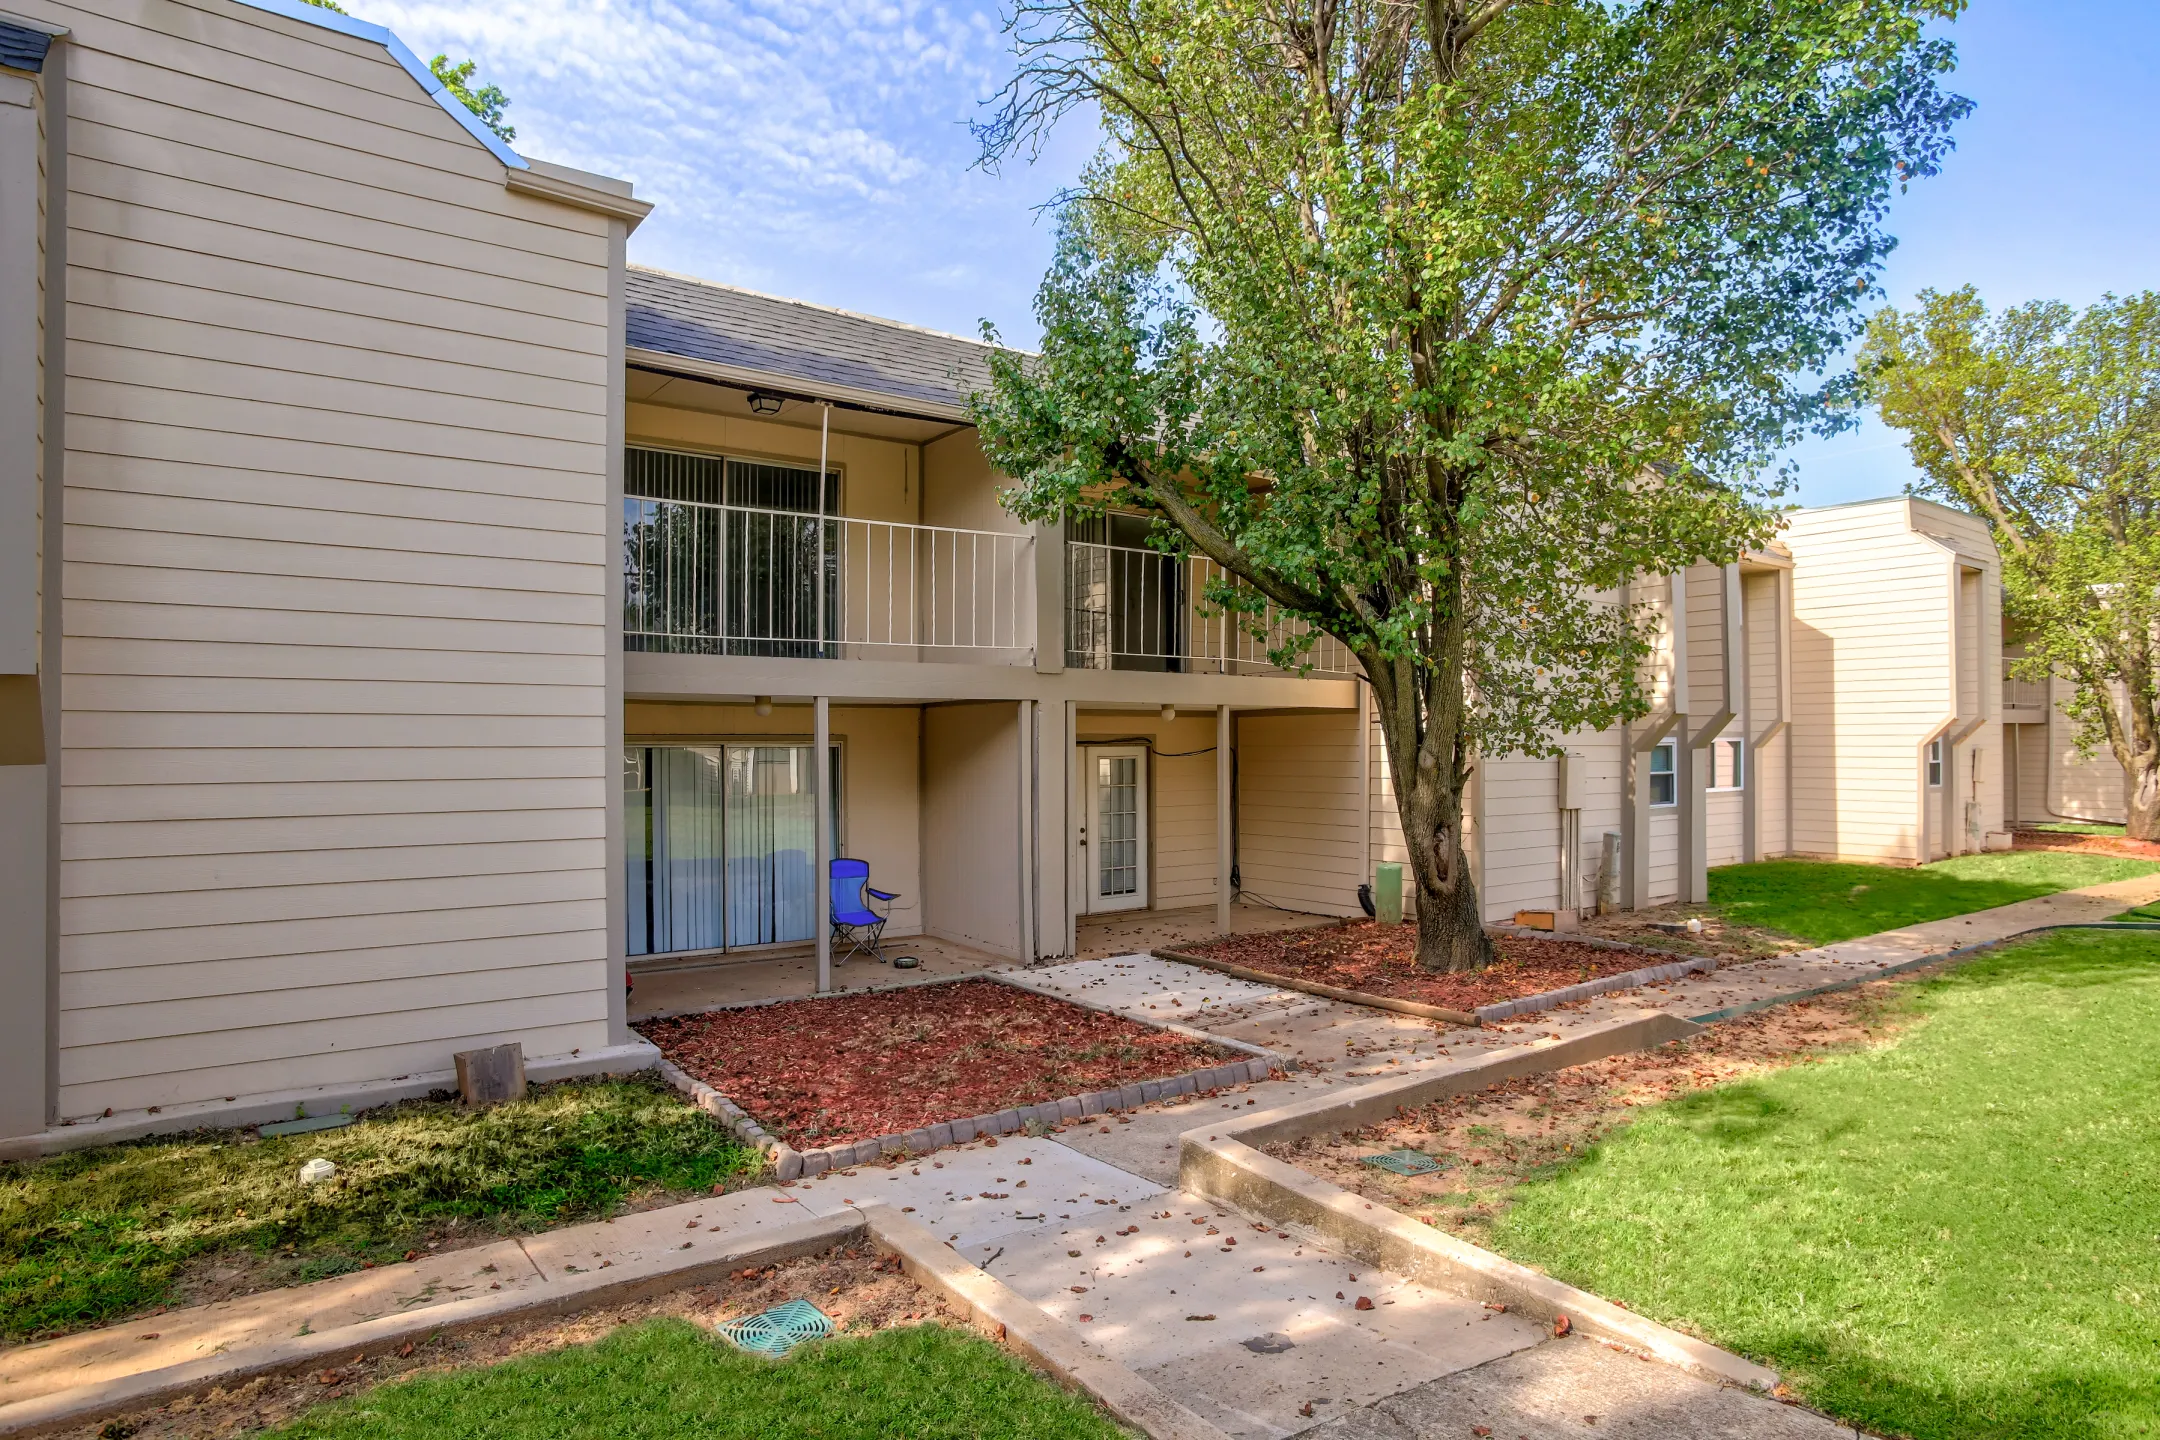 Building - Turnberry Apartments - Norman, OK